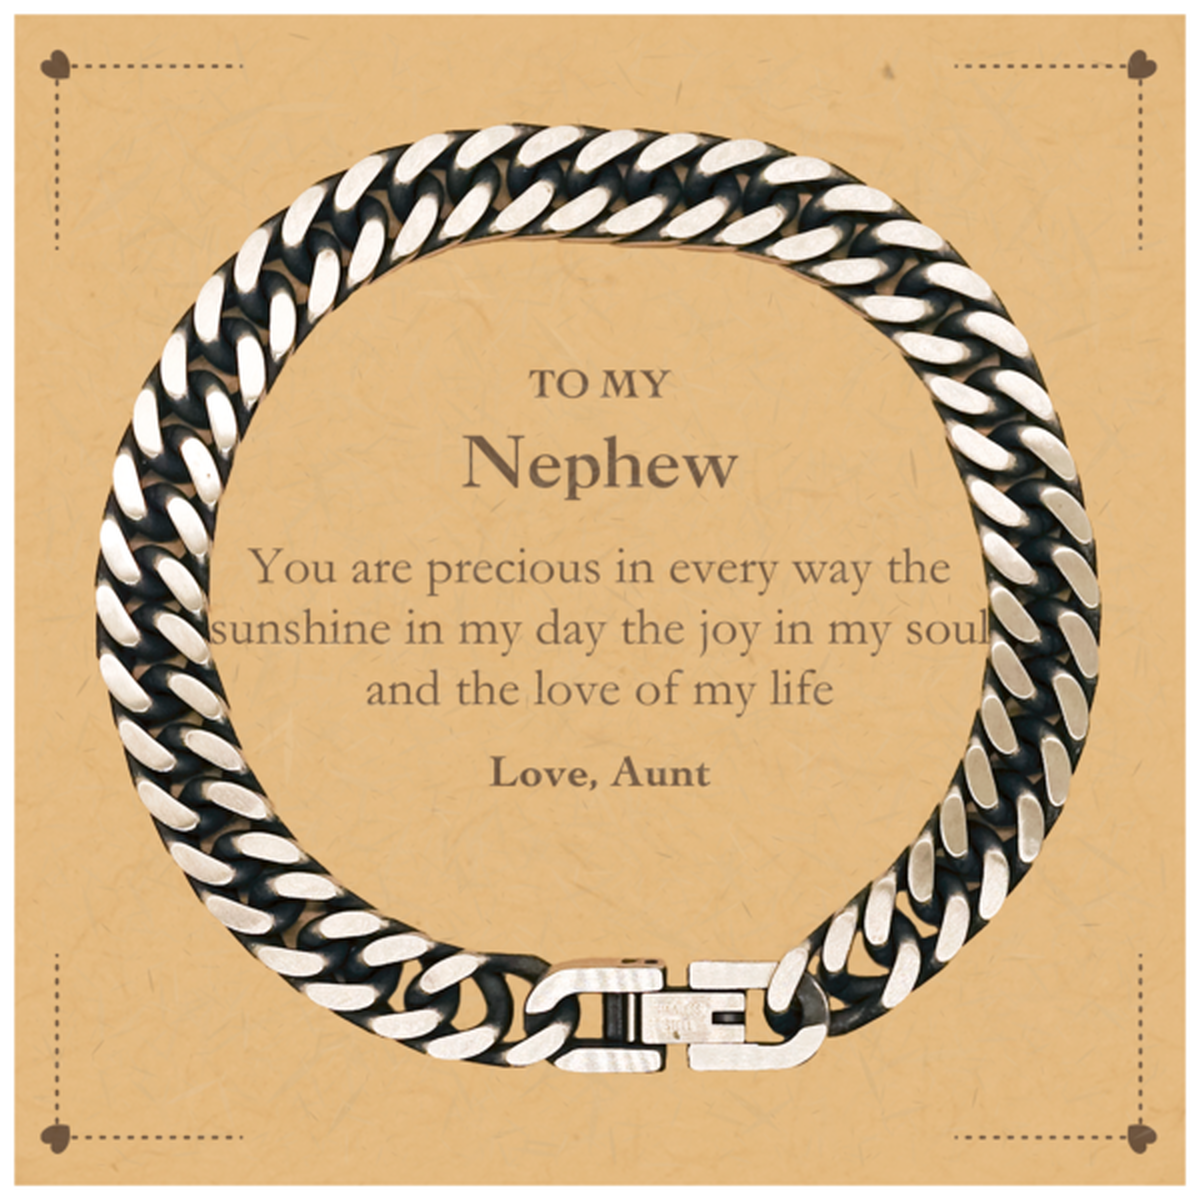 Graduation Gifts for Nephew Cuban Link Chain Bracelet Present from Aunt, Christmas Nephew Birthday Gifts Nephew You are precious in every way the sunshine in my day. Love, Aunt